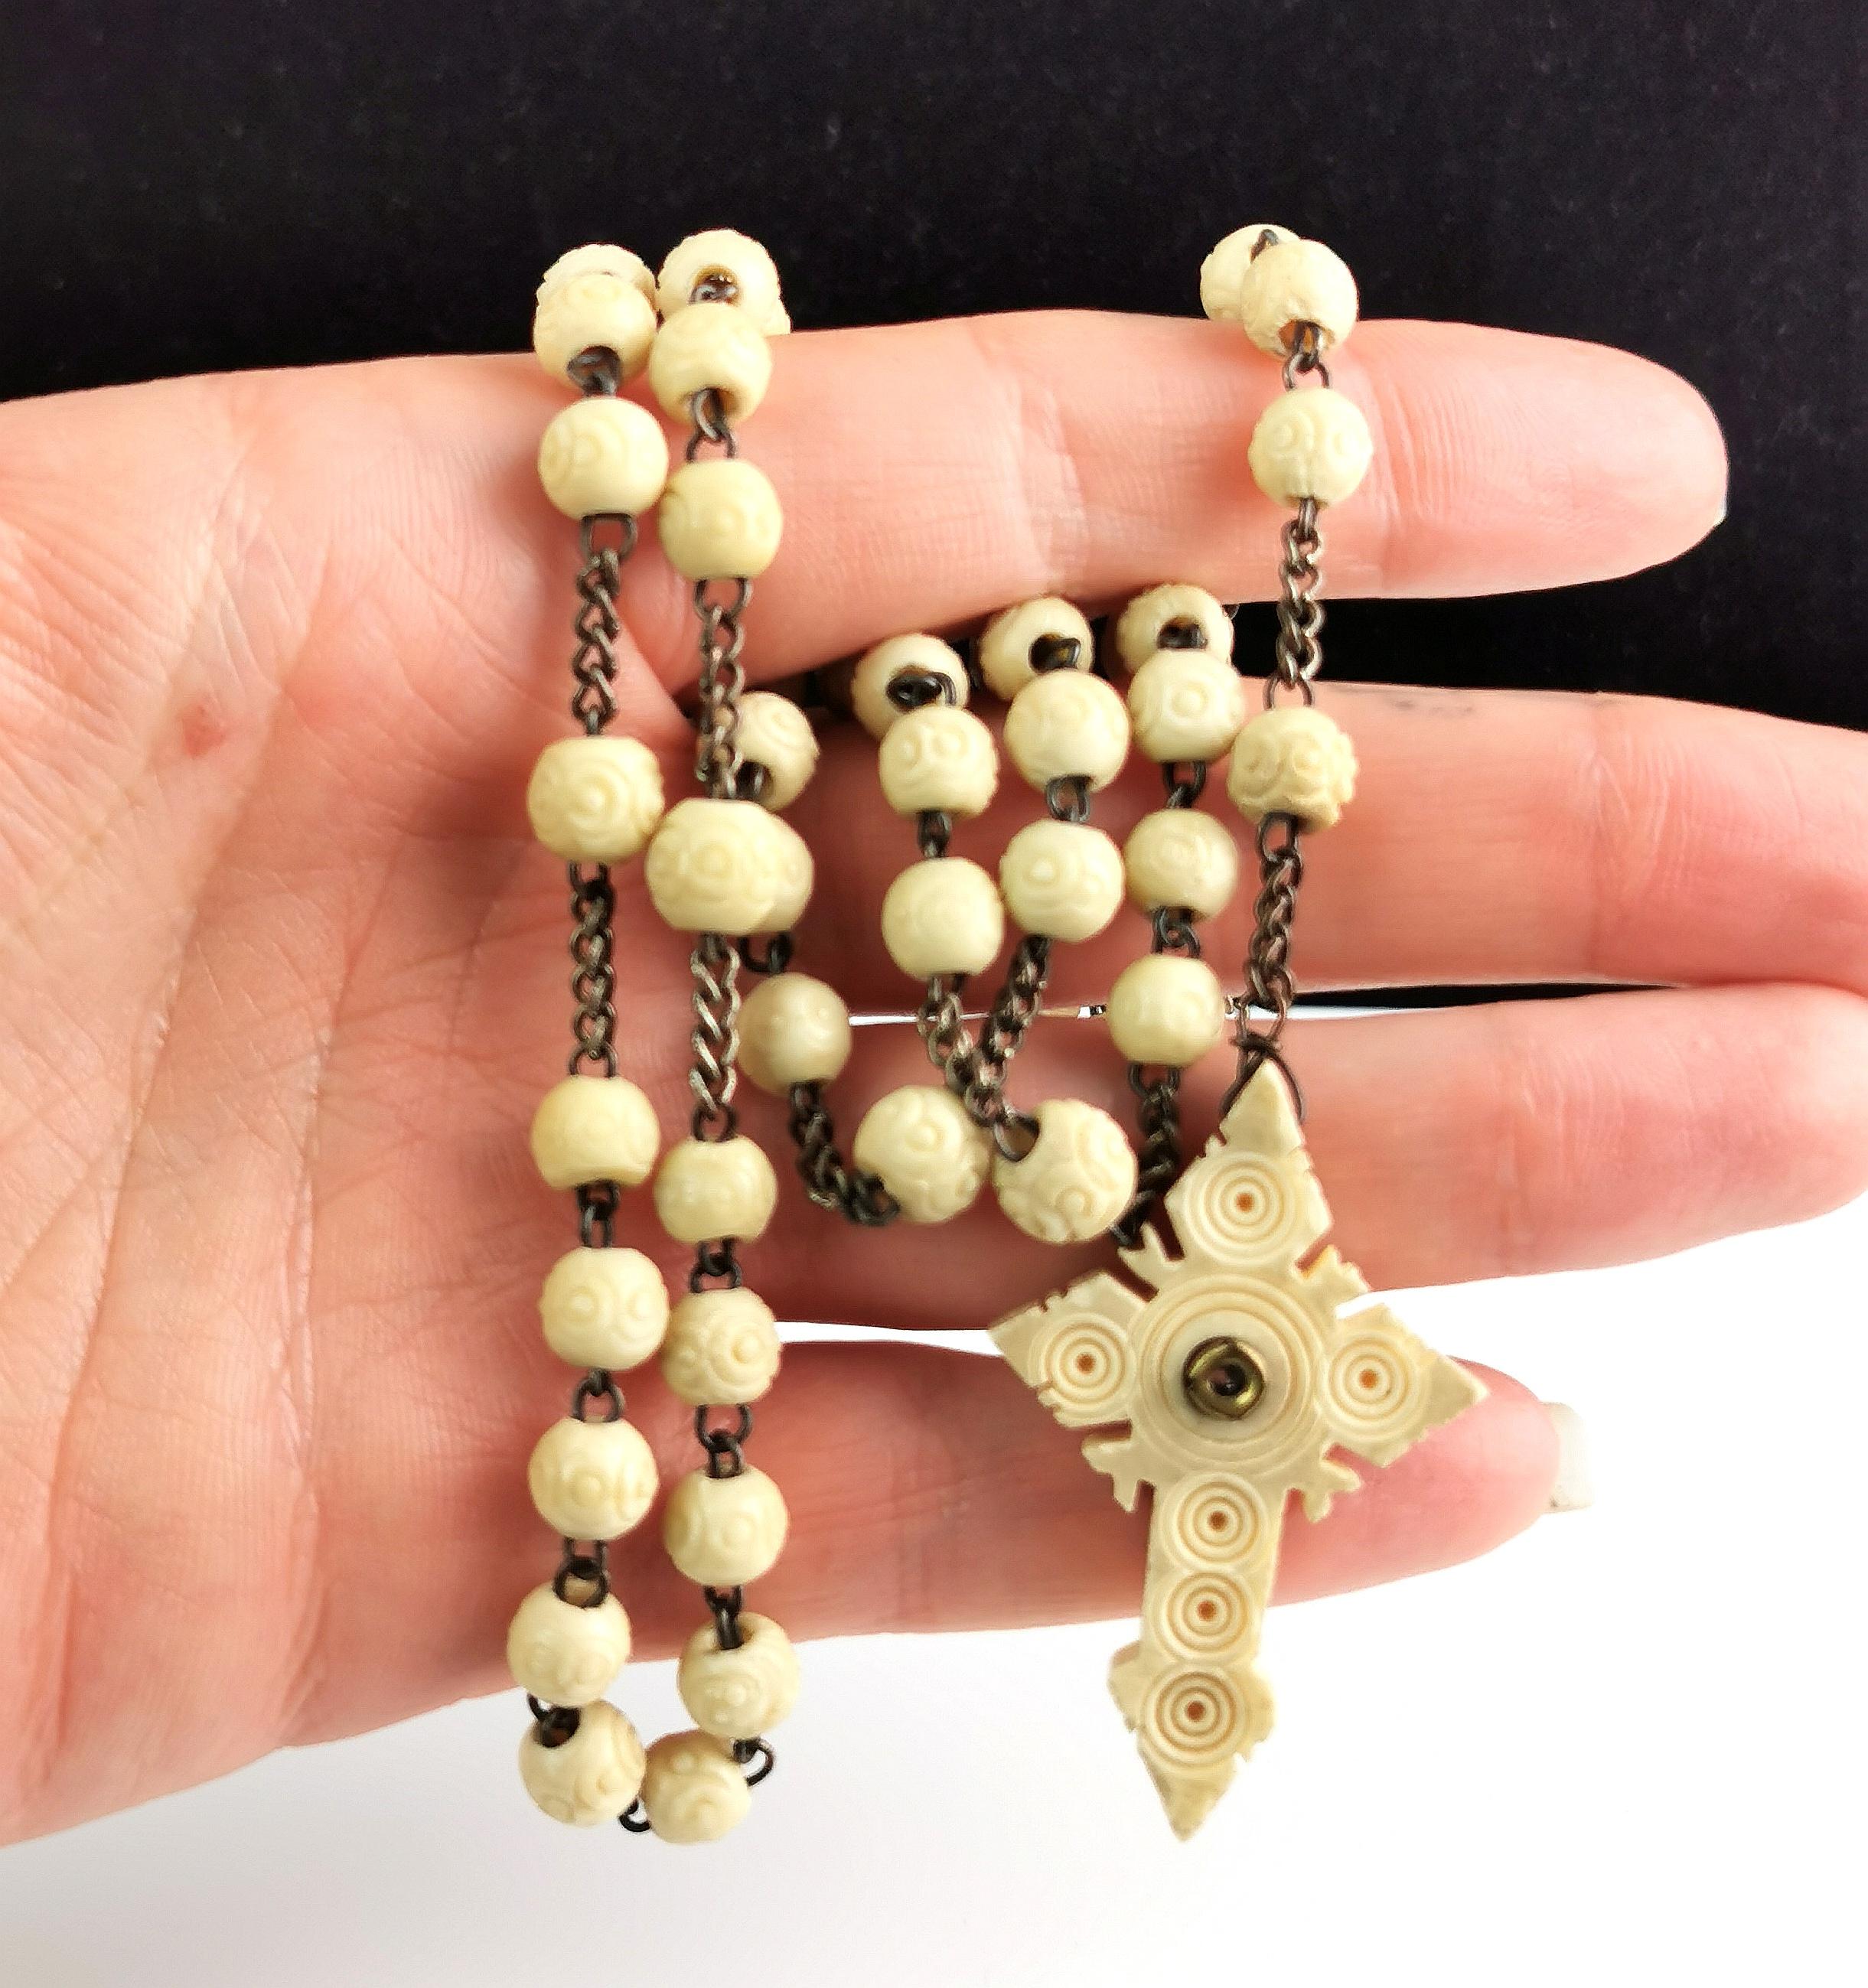 An attractive antique French carved bovine bone rosary bead necklace with a carved bone Cross pendant.

The cross pendant has a Stanhope to the centre showing a religious image possibly of Mary, the glass sits slightly skew so you need to view at an